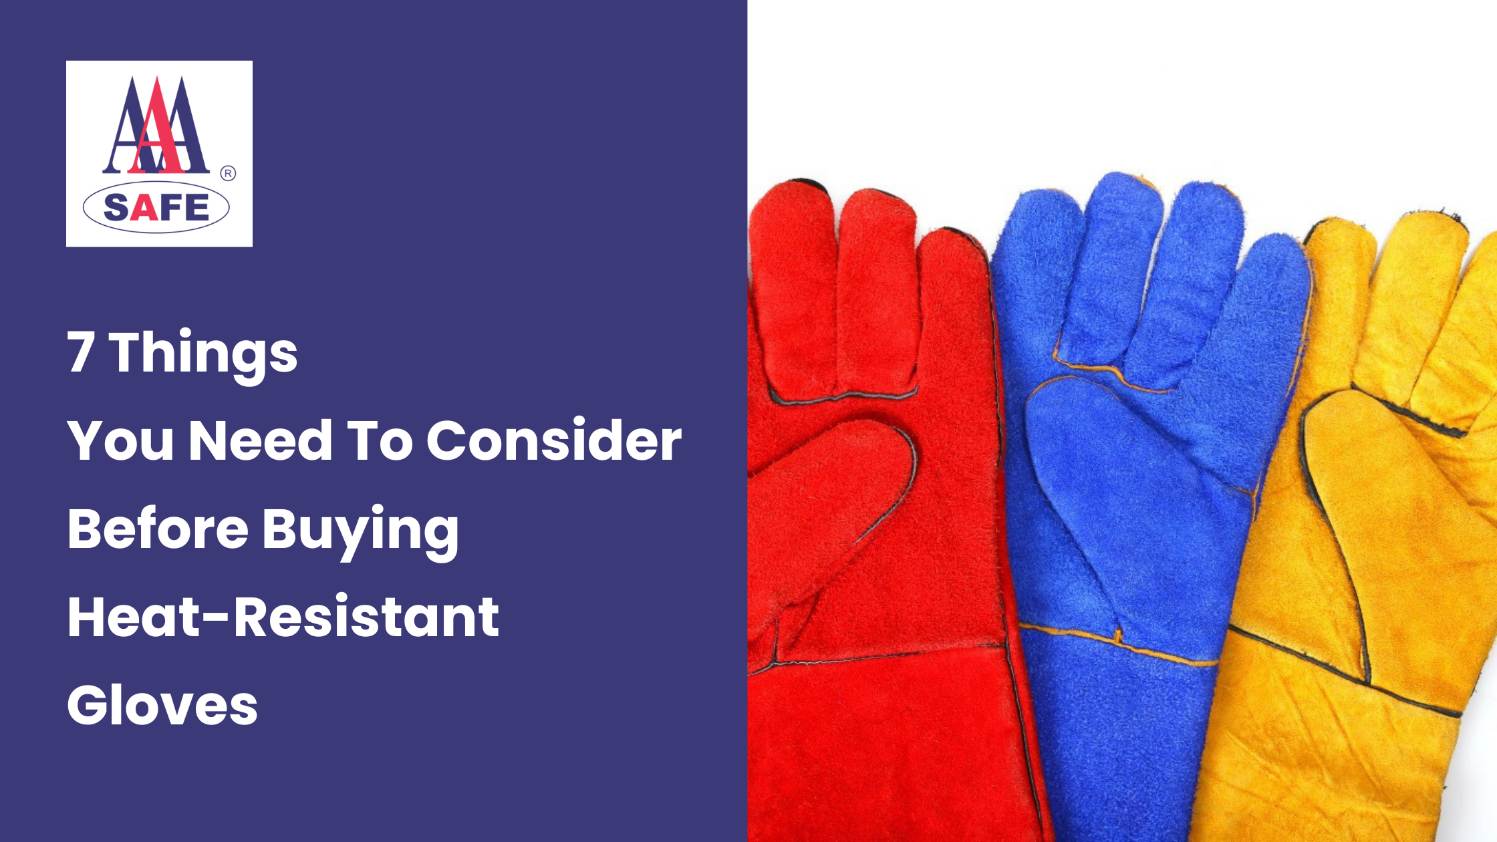 7 Things You Need To Consider Before Buying Heat-Resistant Gloves